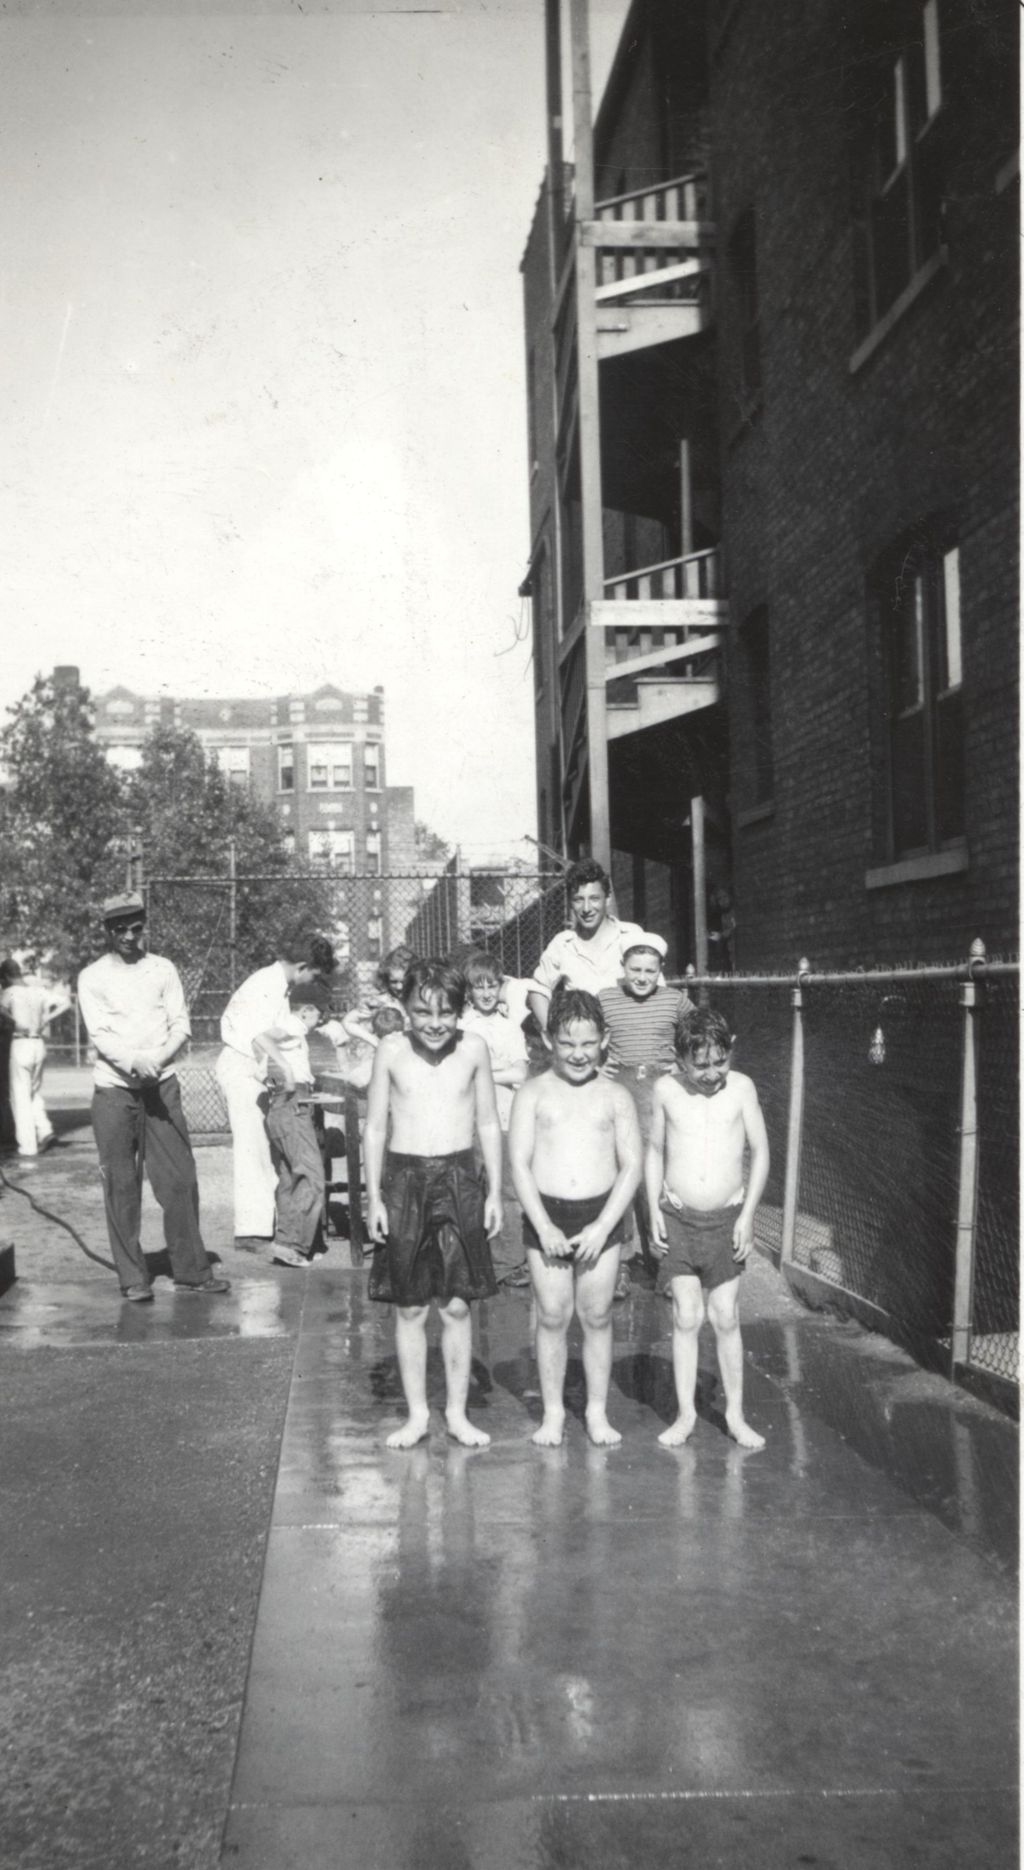 Miniature of Three boys in bathing suits being sprayed with garden hose